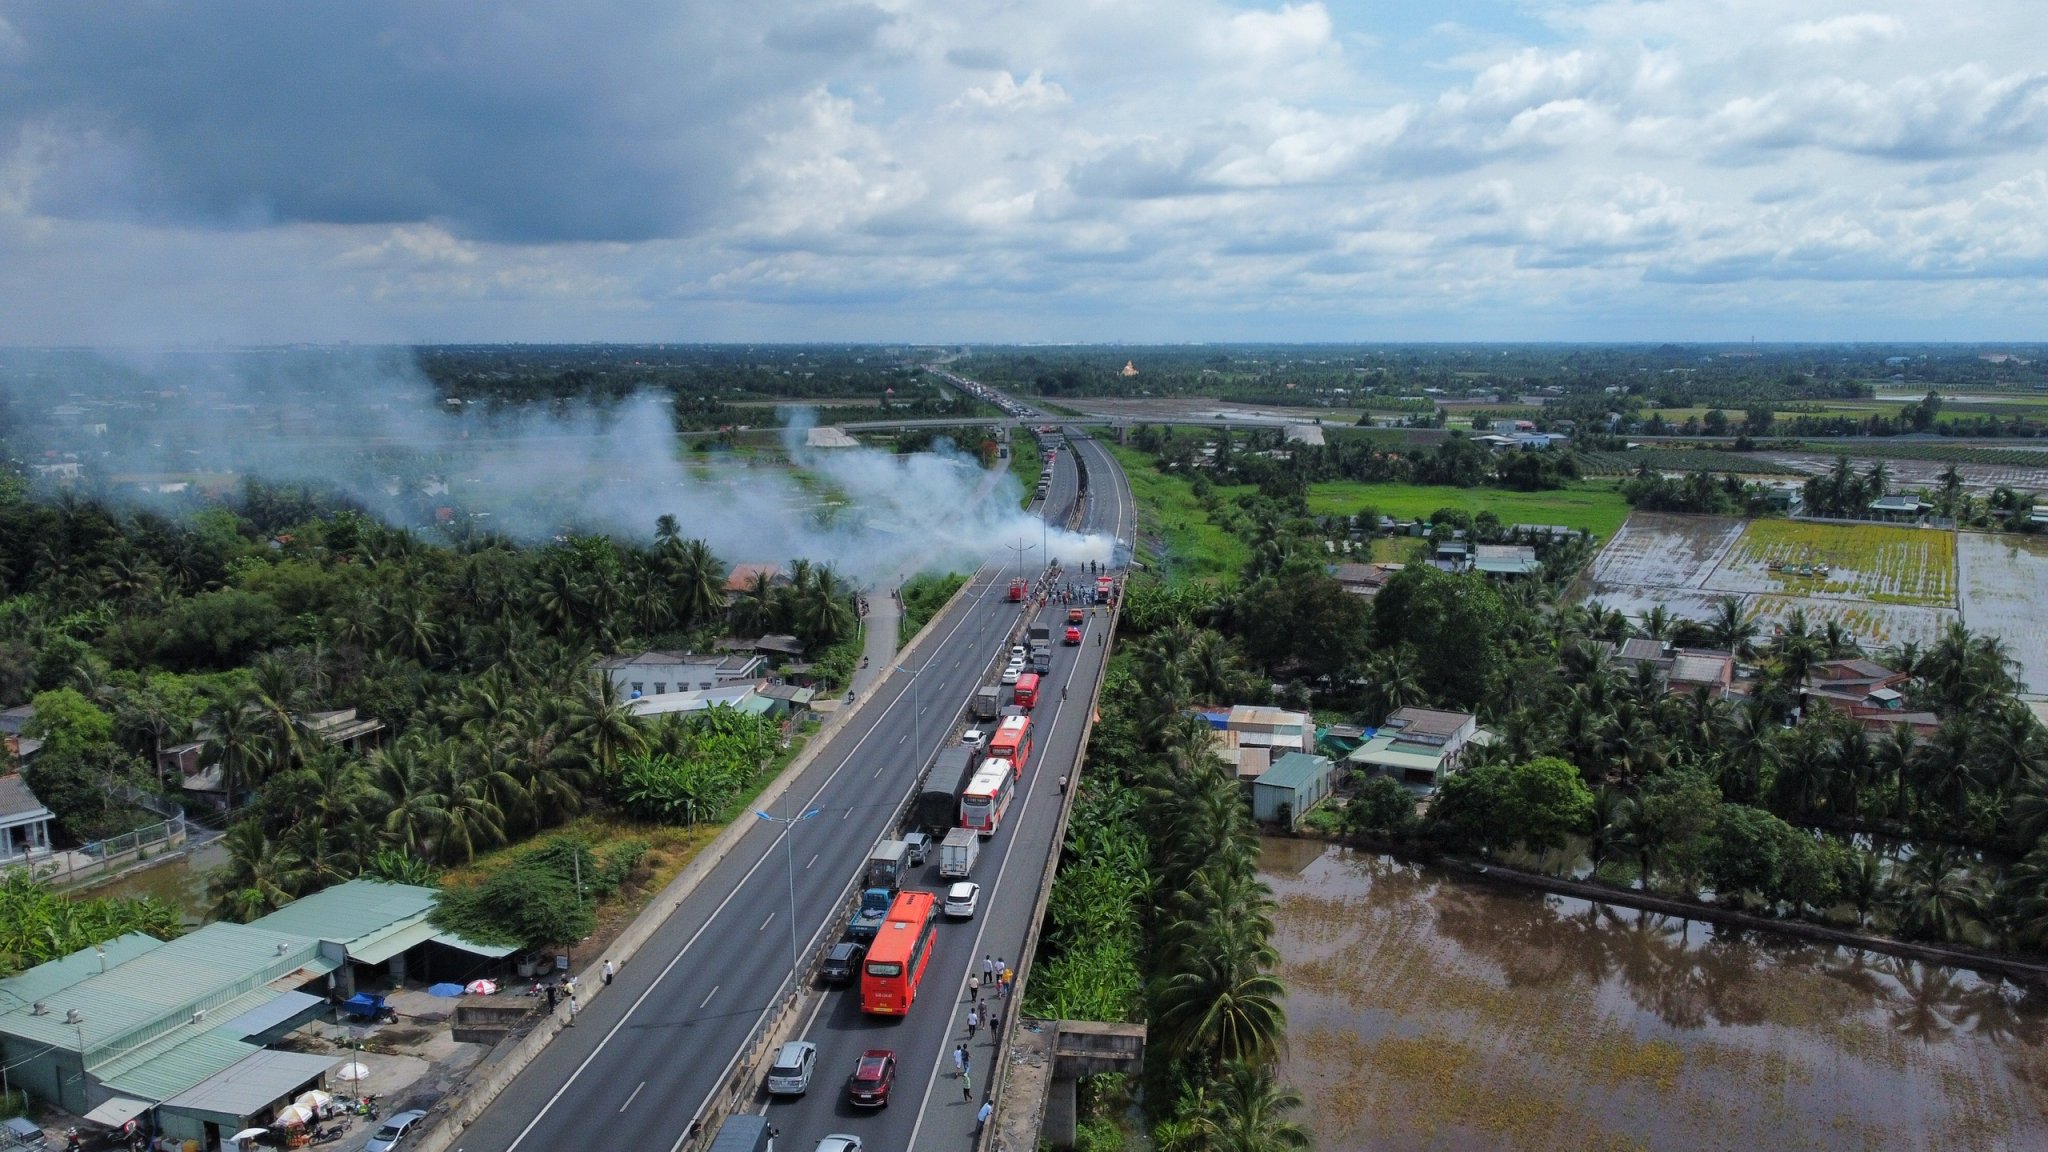 A bird’s-eye view of the fire along the Ho Chi Minh City-Trung Luong Expressway, May 4, 2022. Photo: Son Lam / Tuoi Tre